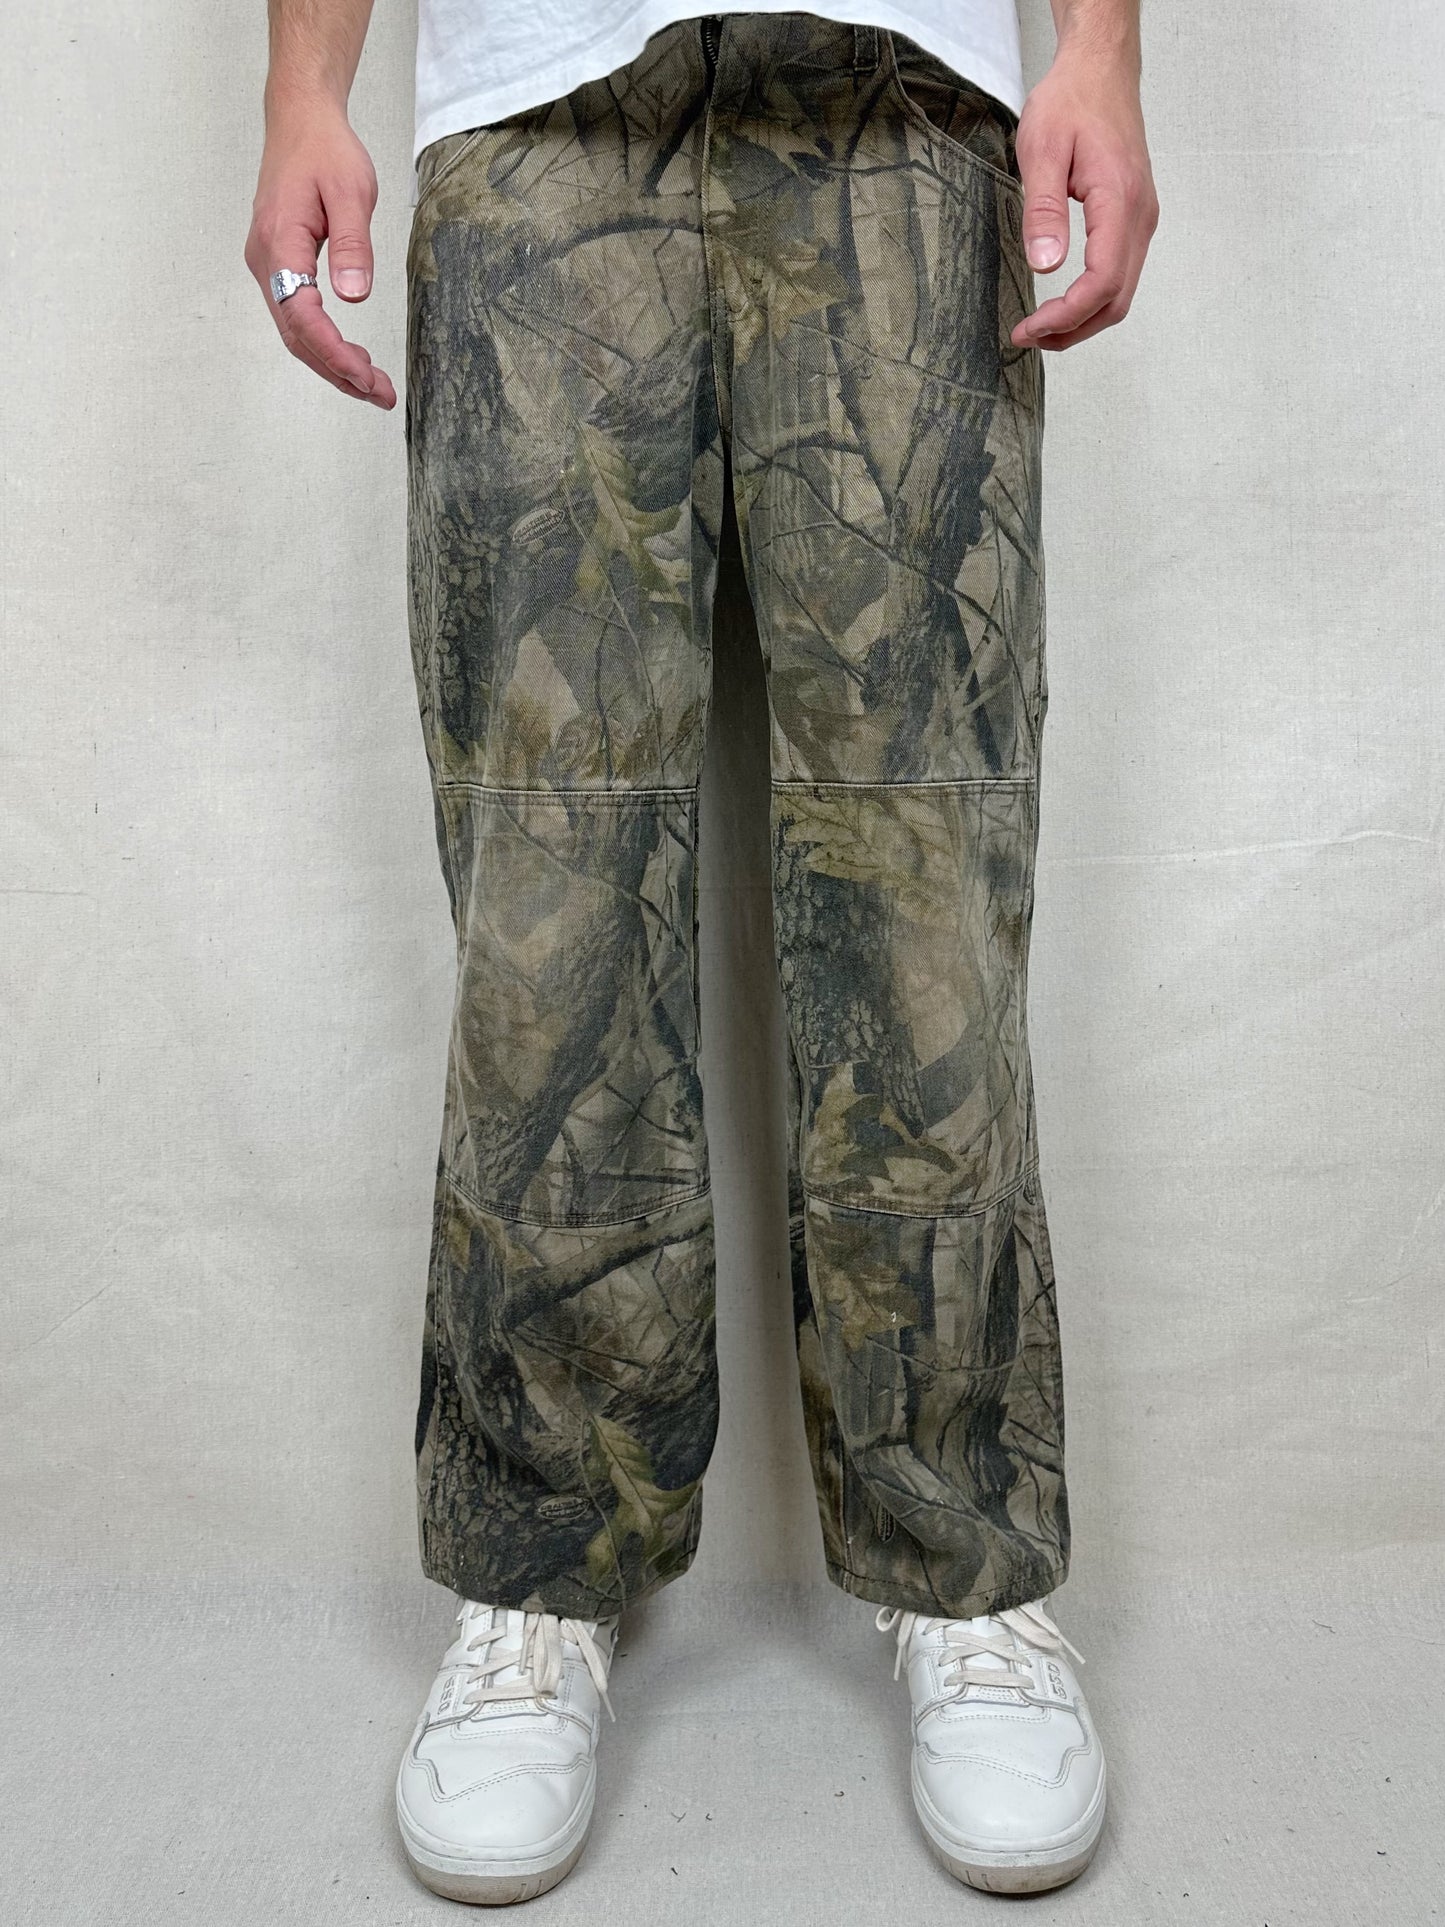 90's Realtree Camo Double Knee Vintage Jeans Size 32x29